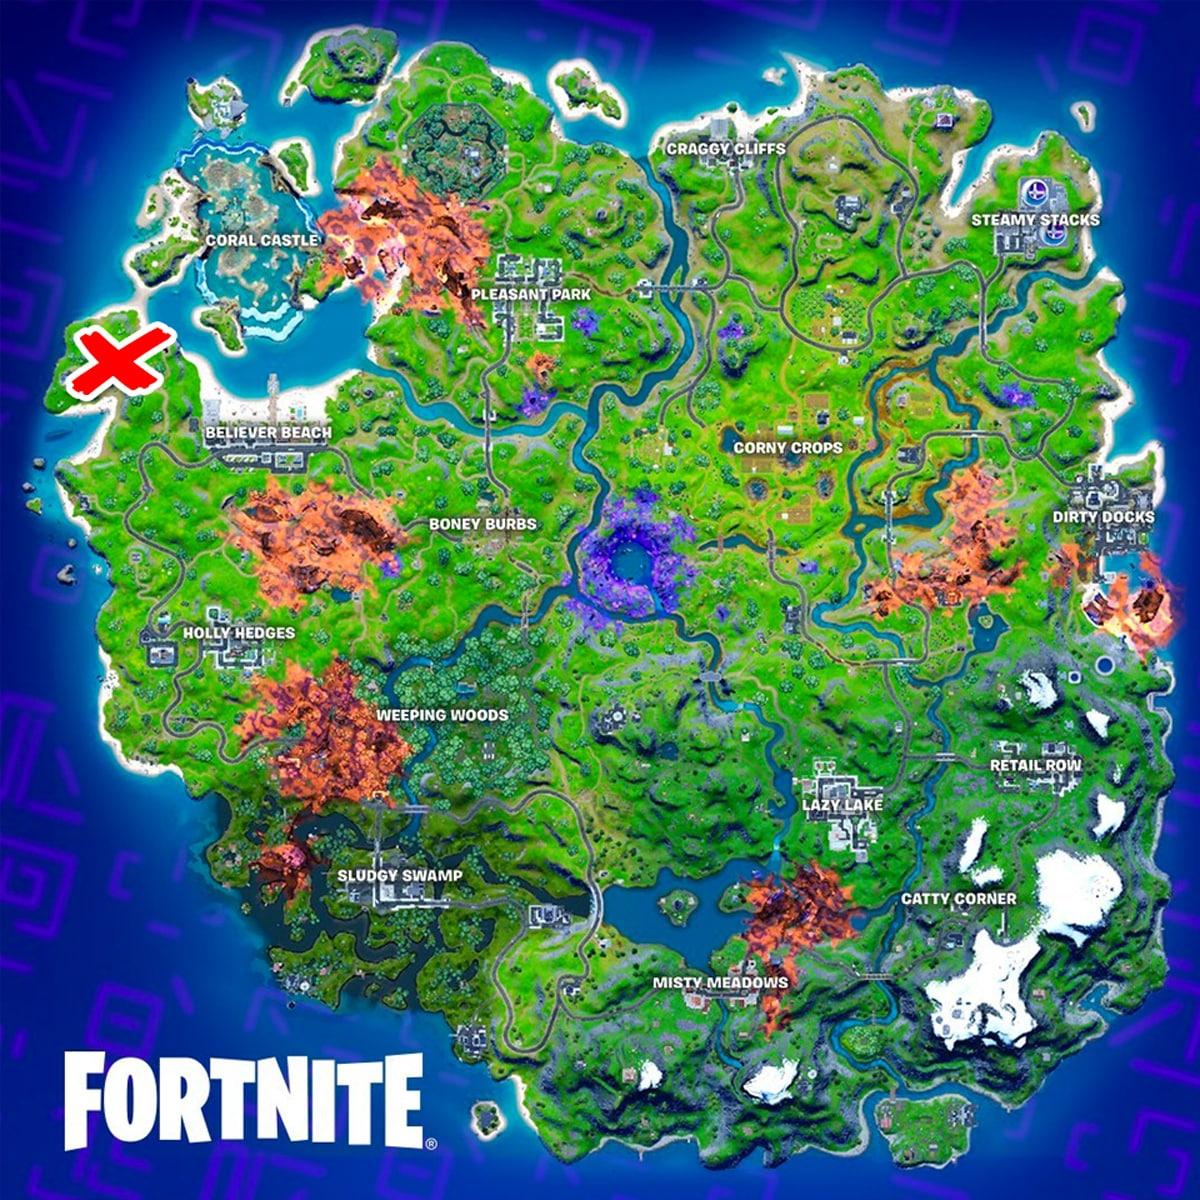 The location of Fort Crumpet marked with an X on the Fortnite map